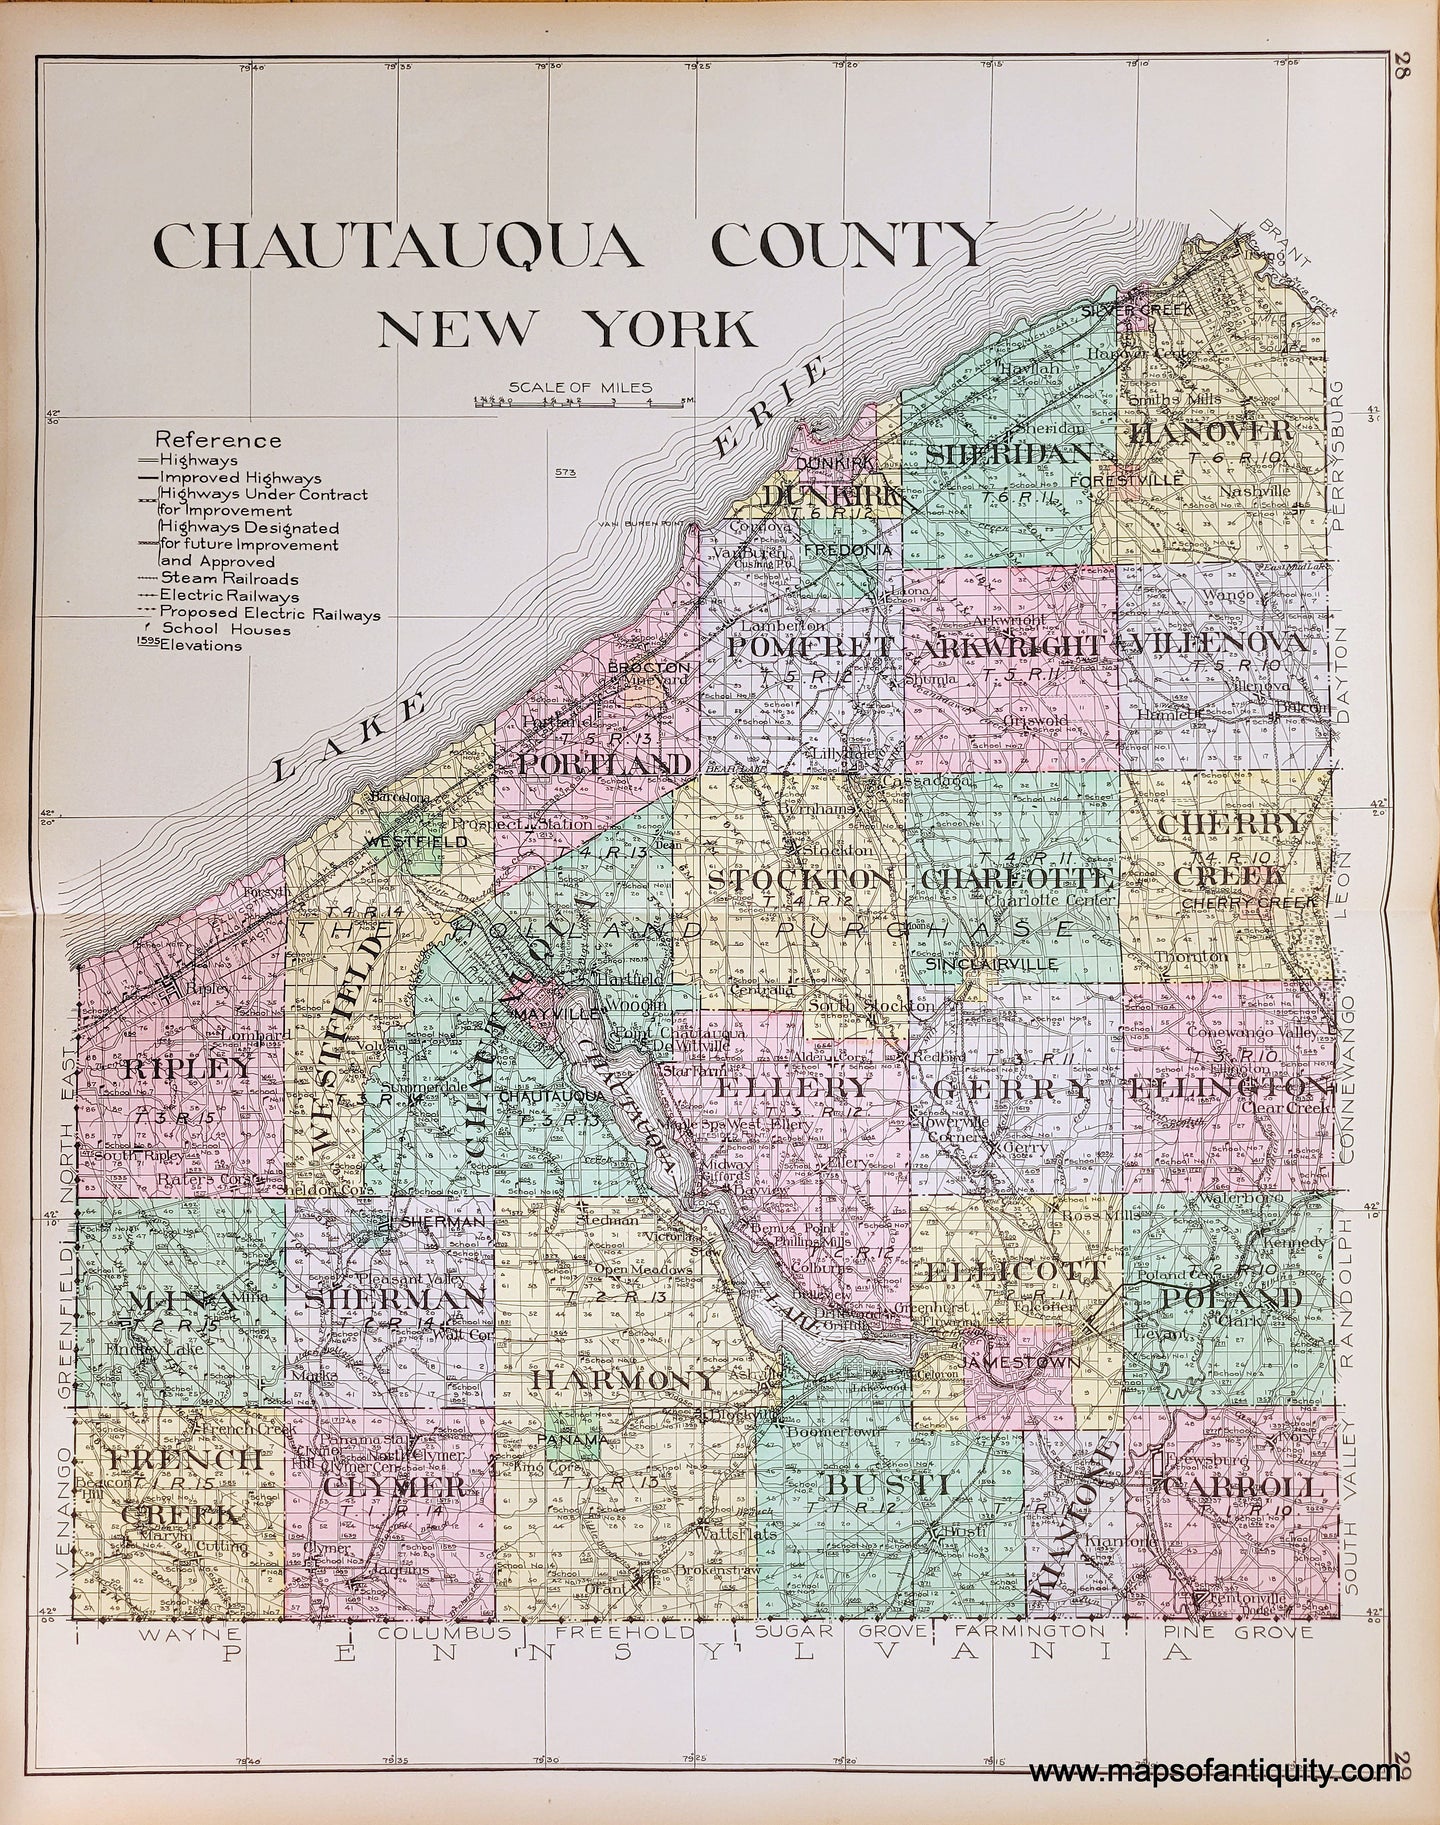 Antique-Hand-Colored-Map-Chautauqua-County-New-York-United-States-New-York-1911-Everts-Maps-Of-Antiquity